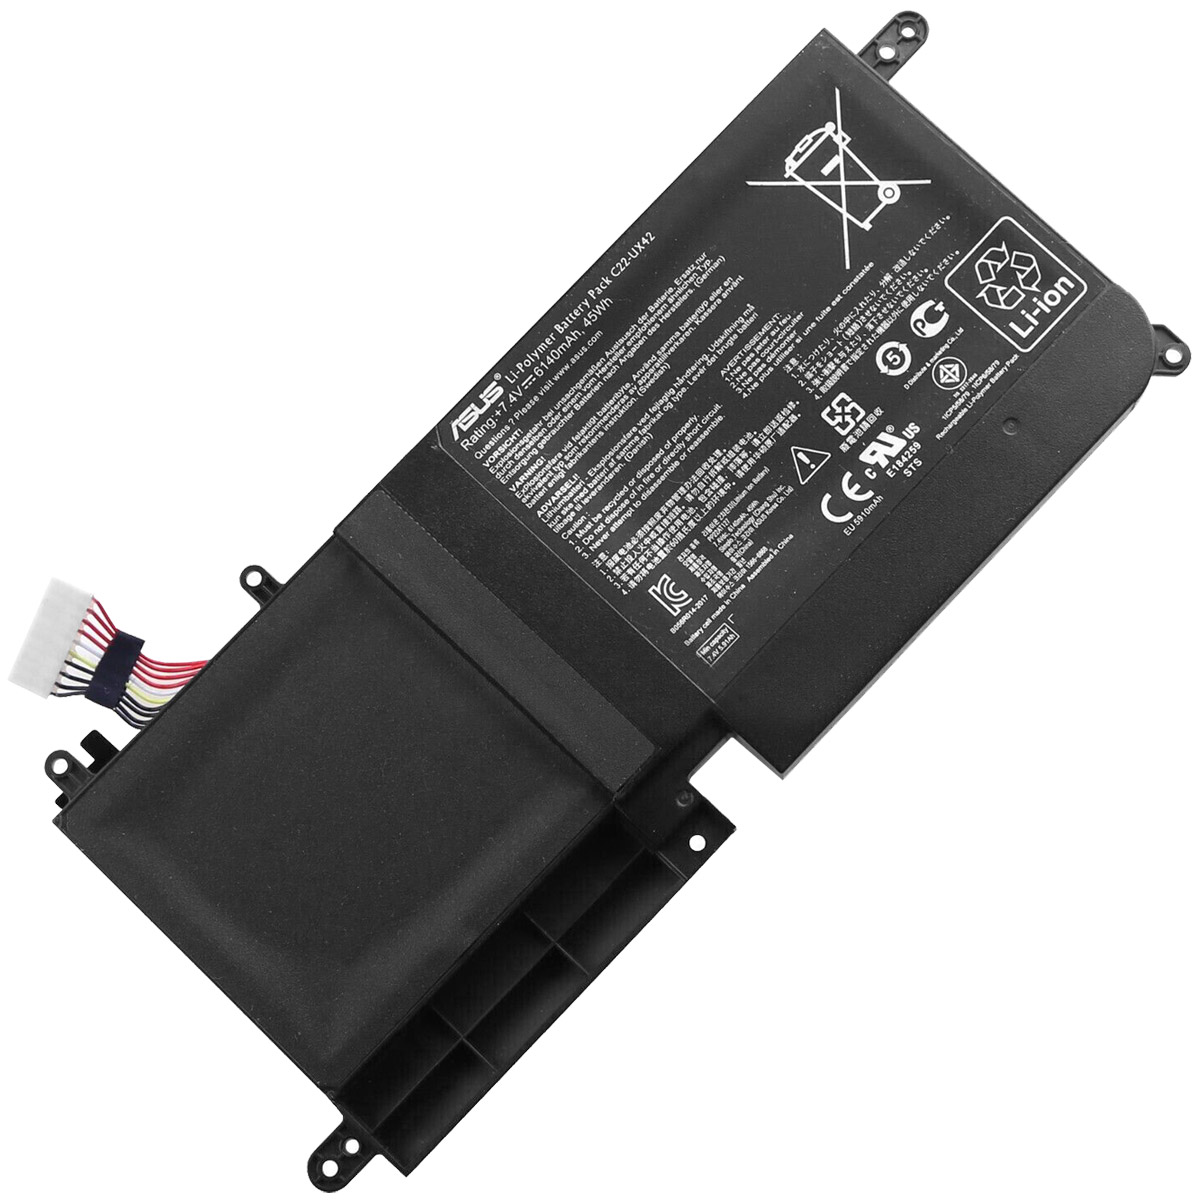 ASUS-C22-UX42-Laptop Replacement Battery